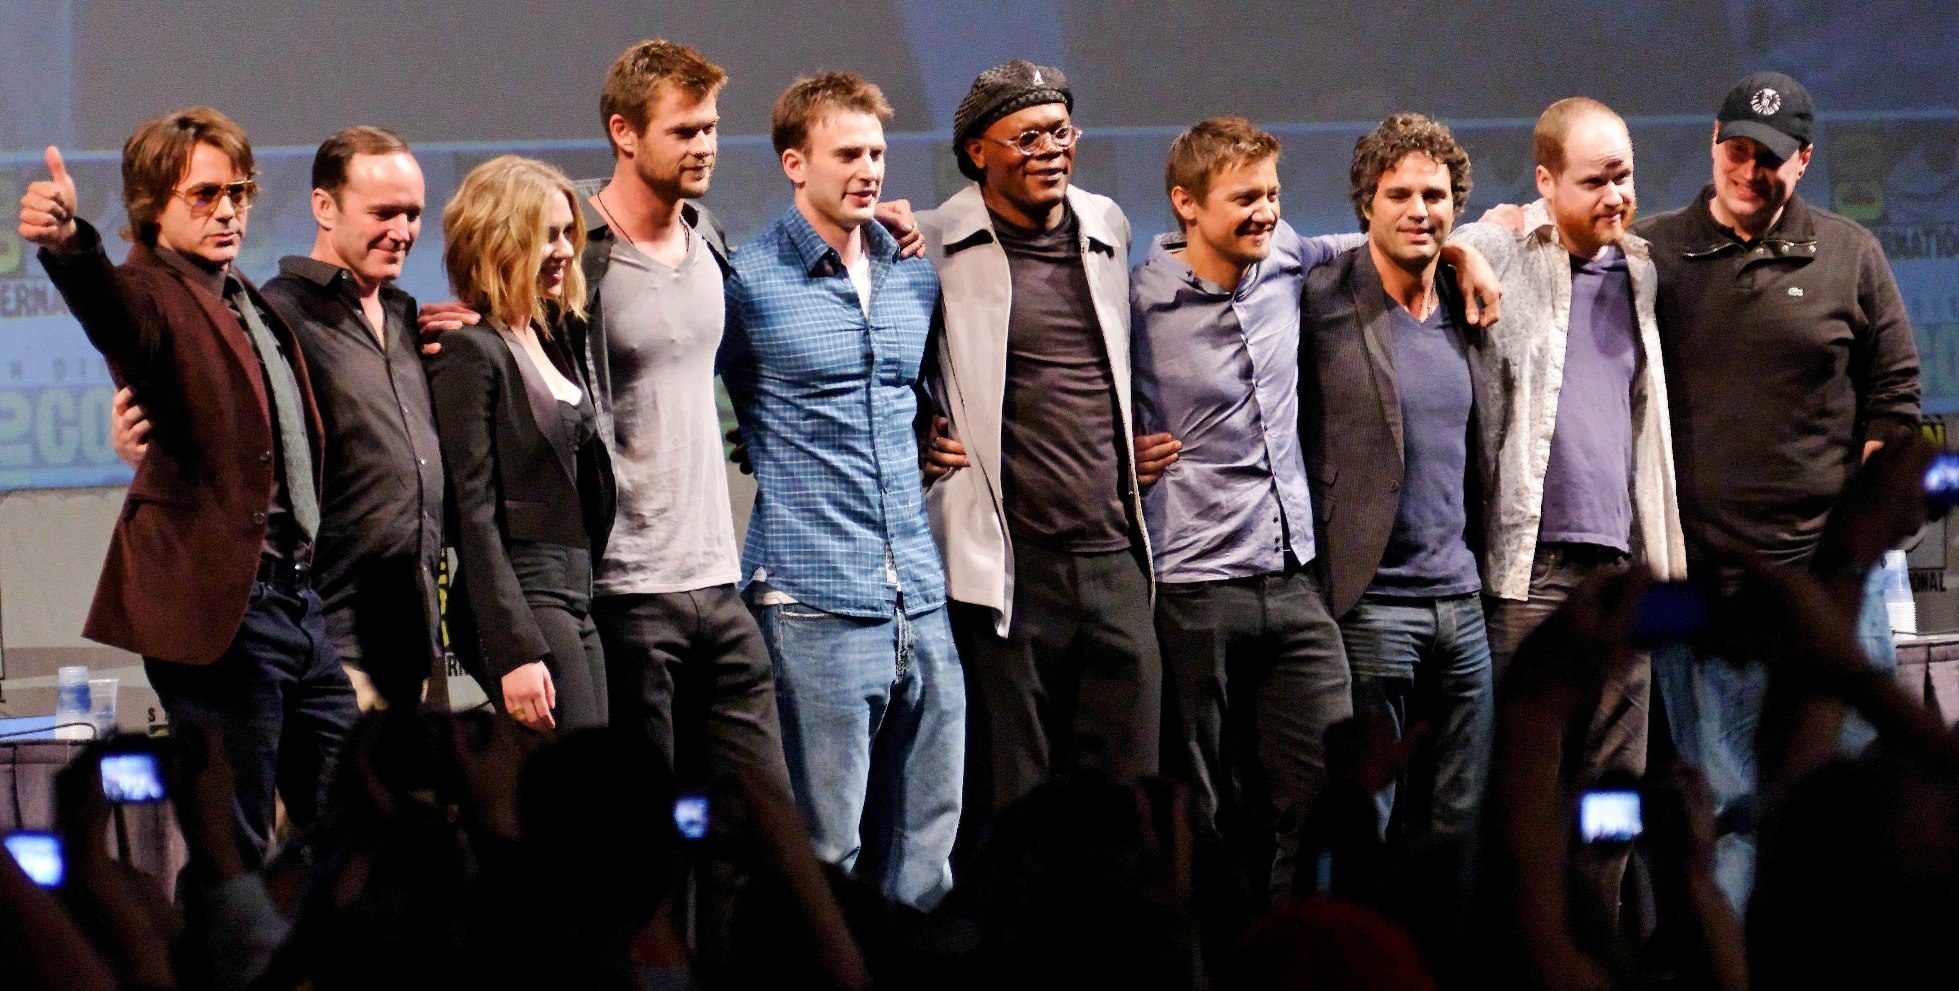 The Avengers Cast 2010 Comic Con cropped